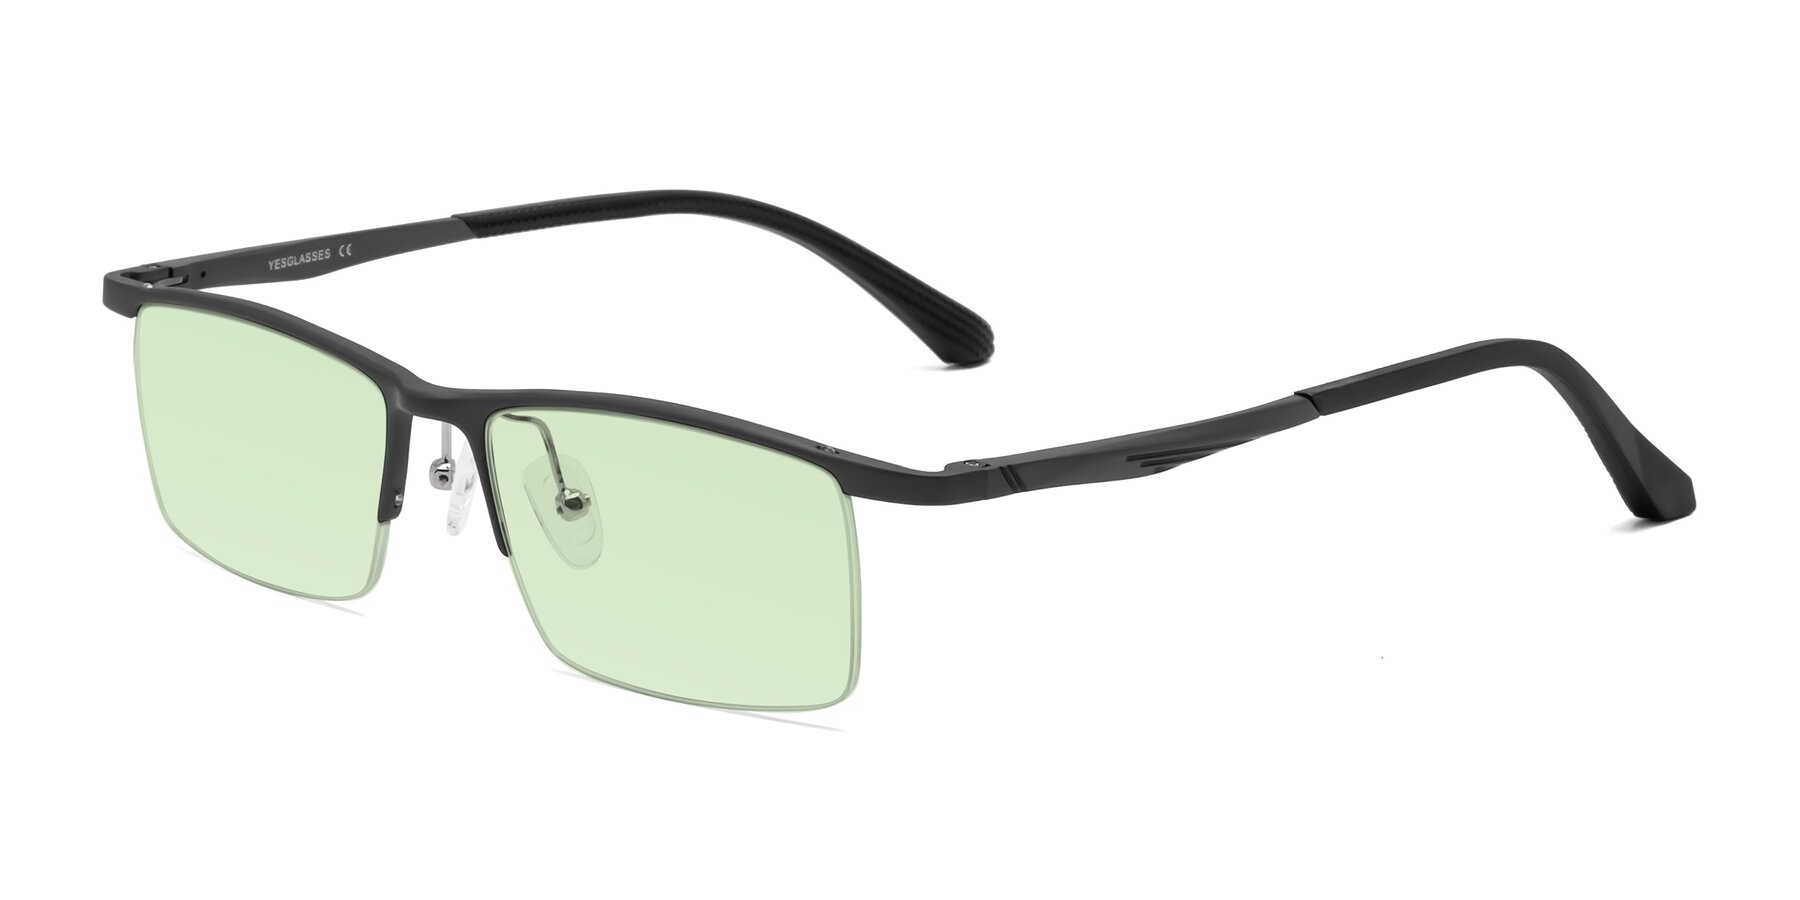 Angle of CX6236 in Gunmetal with Light Green Tinted Lenses